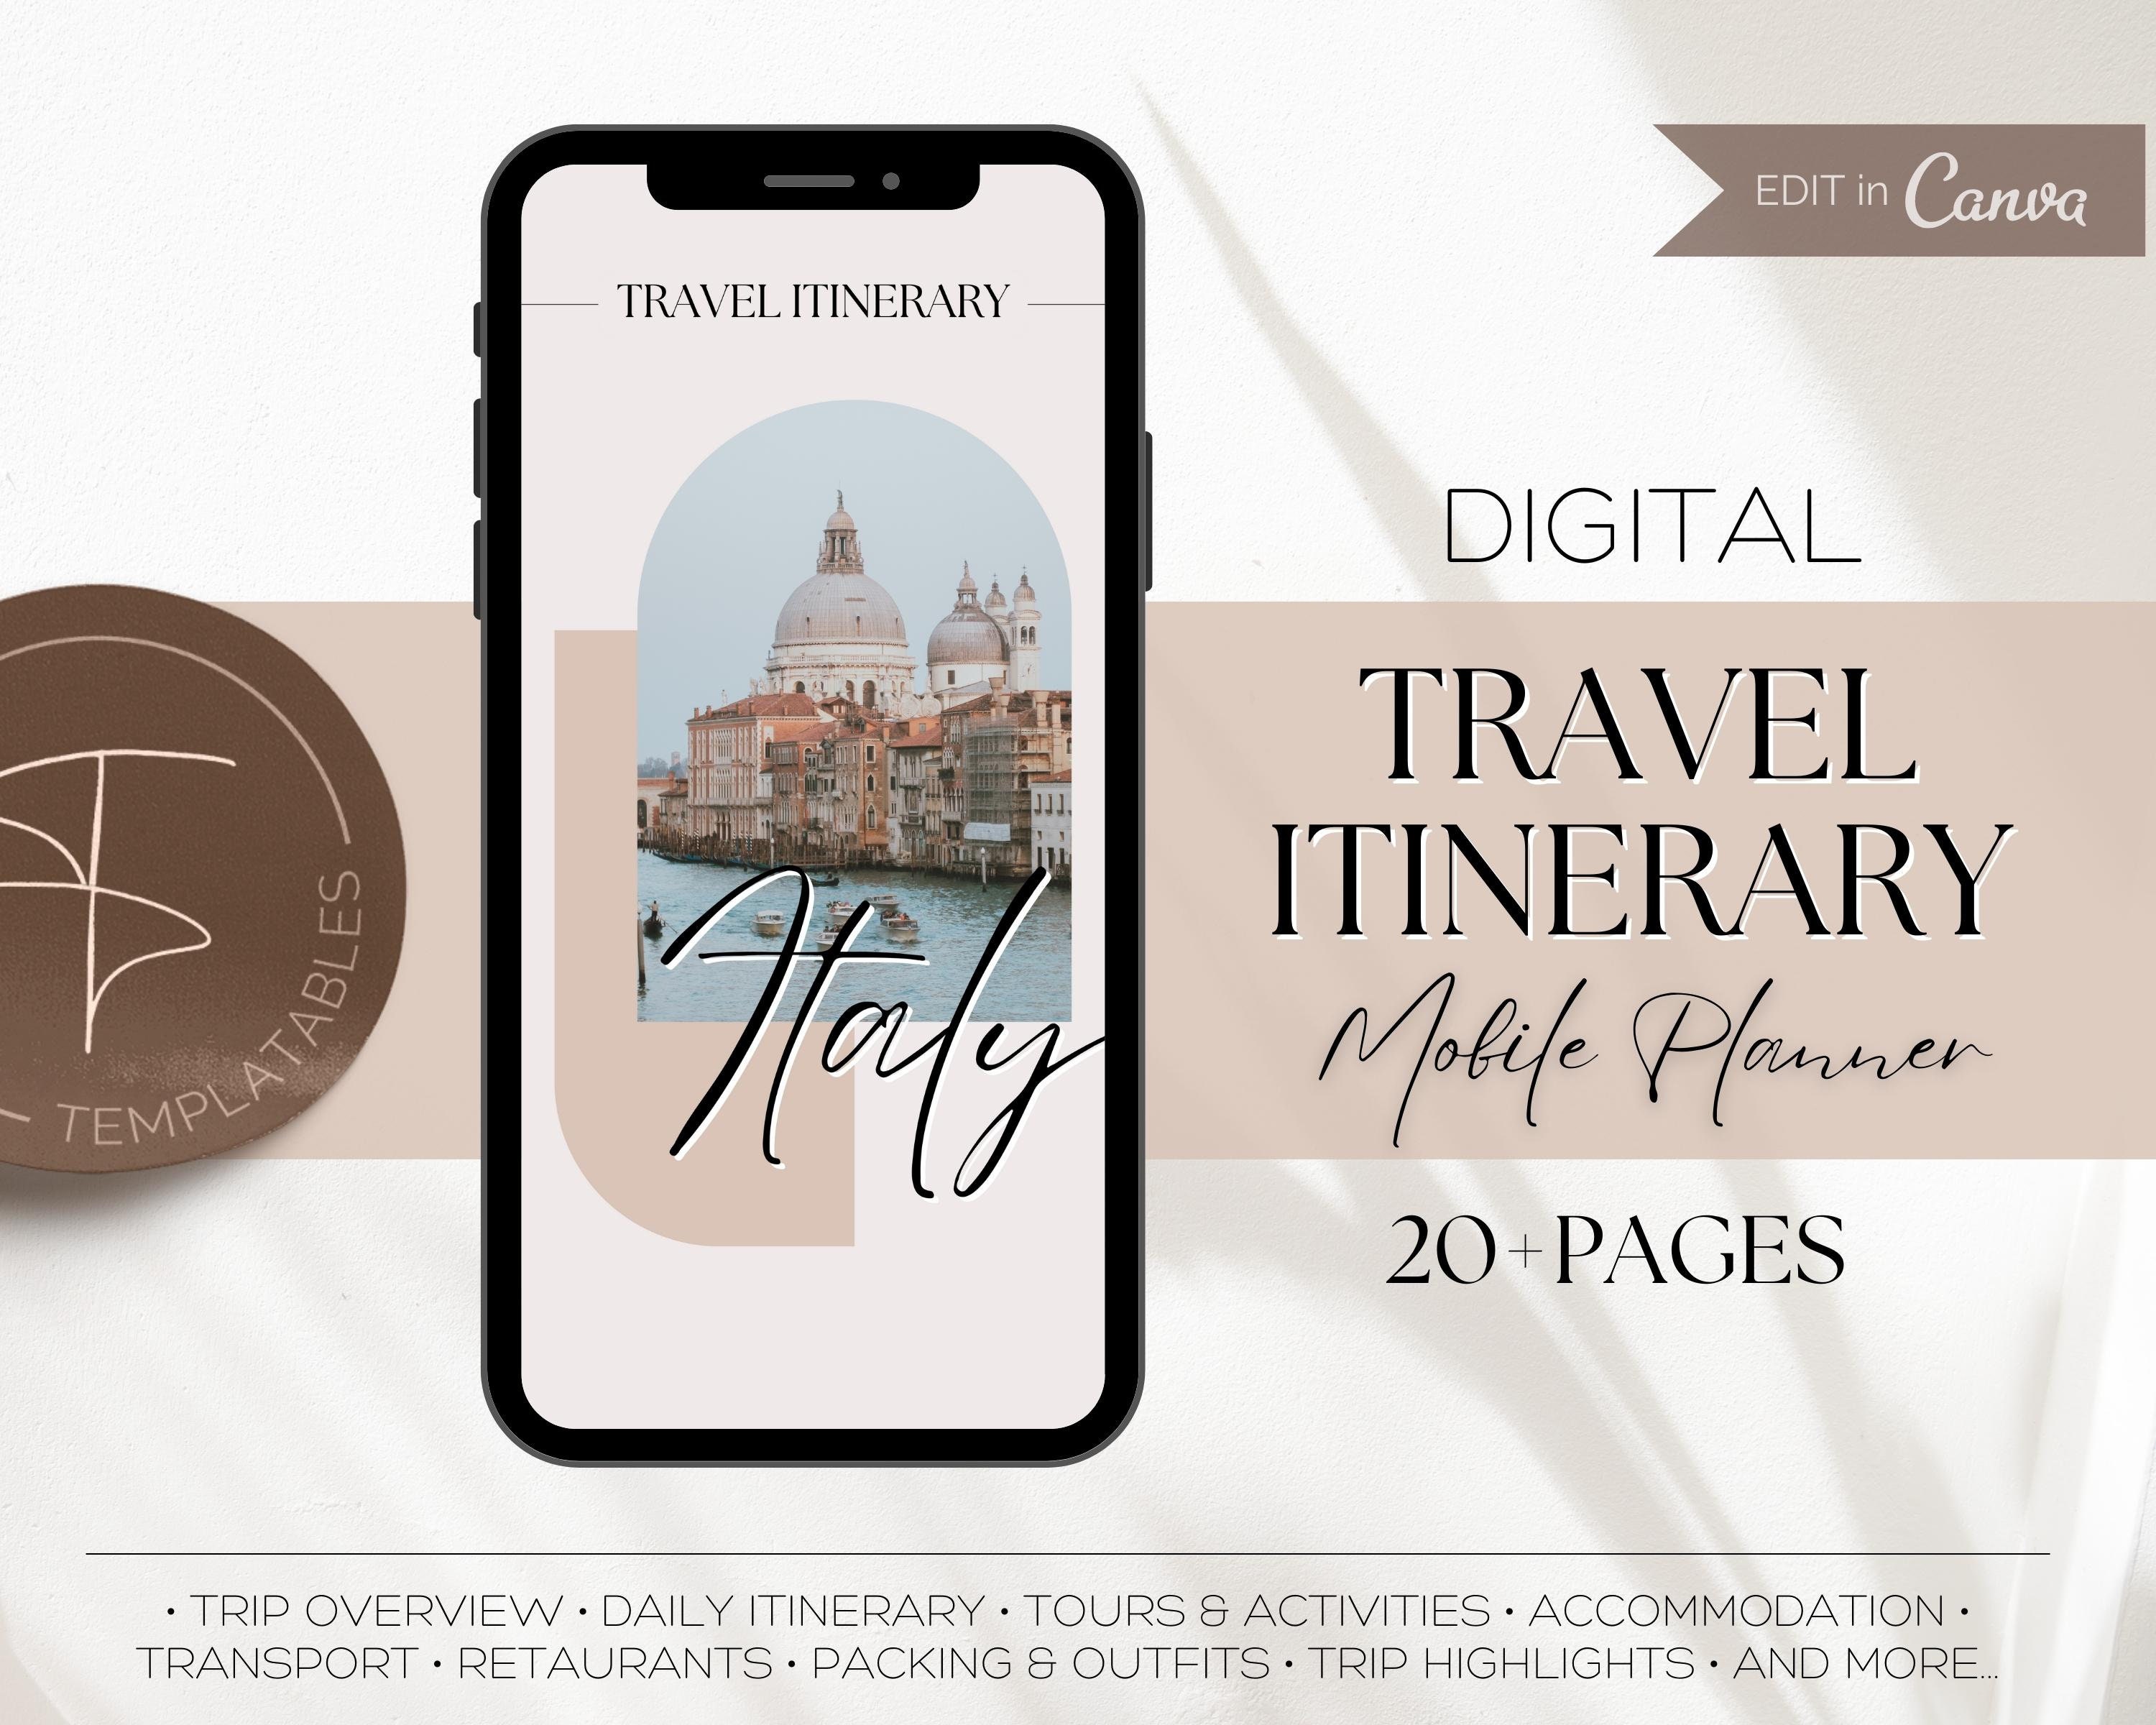 Travel Itinerary Template, Digital Travel Guide, Mobile Weekend Trip  Itinerary, Birthday, Girls Trip, Travel Agent Planner, Canva Template 